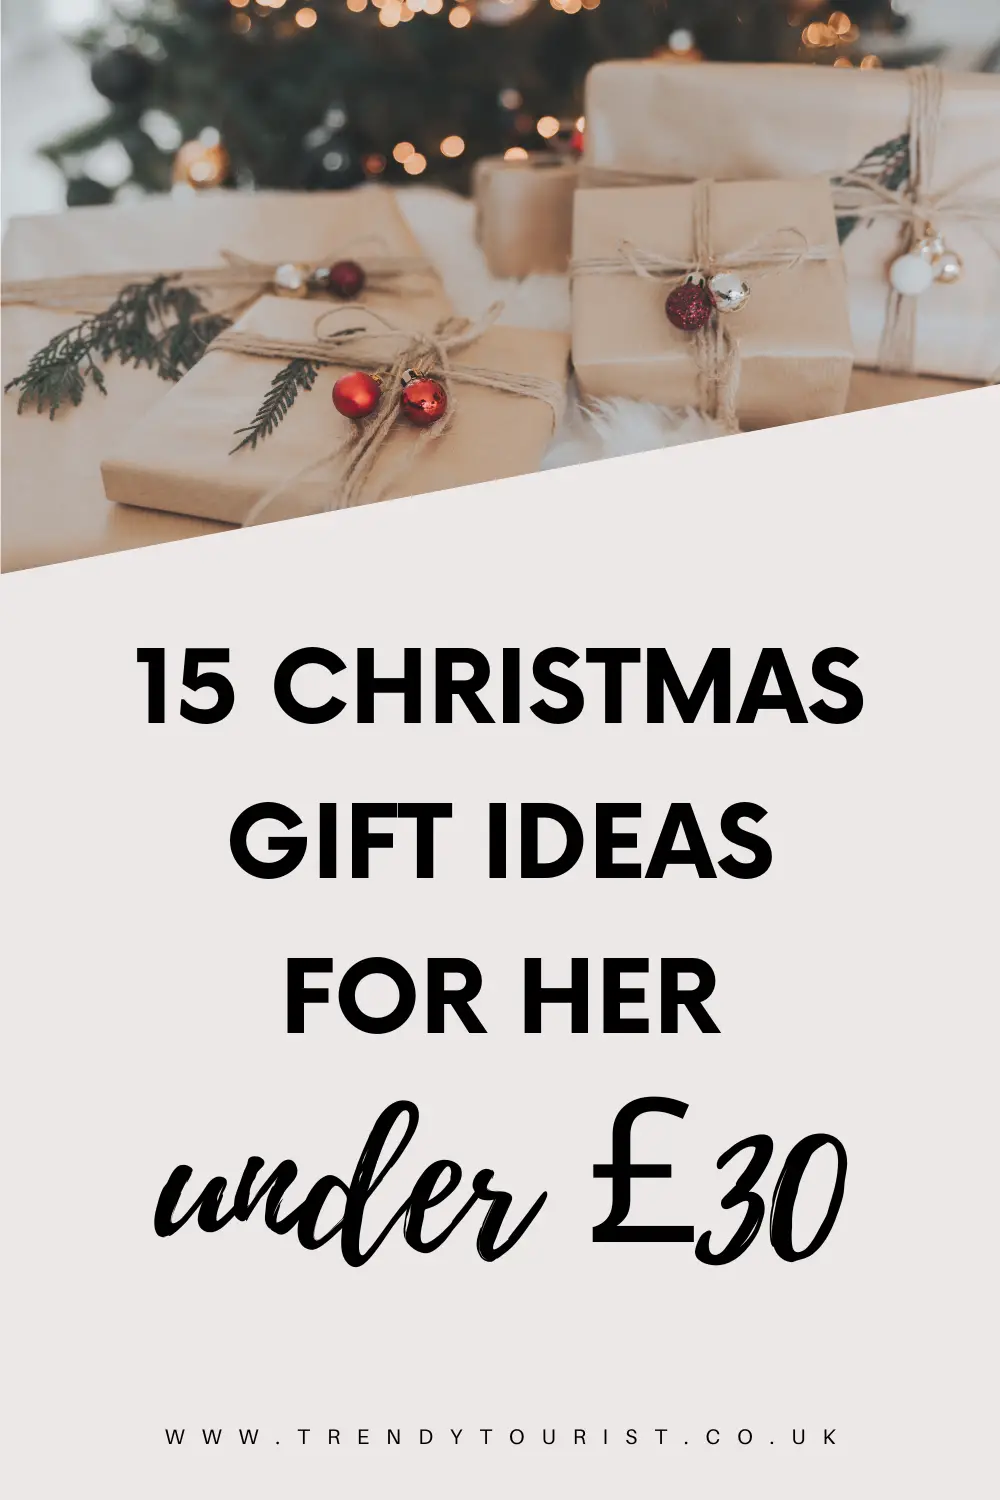 15 Christmas Gifts for Her Under £30